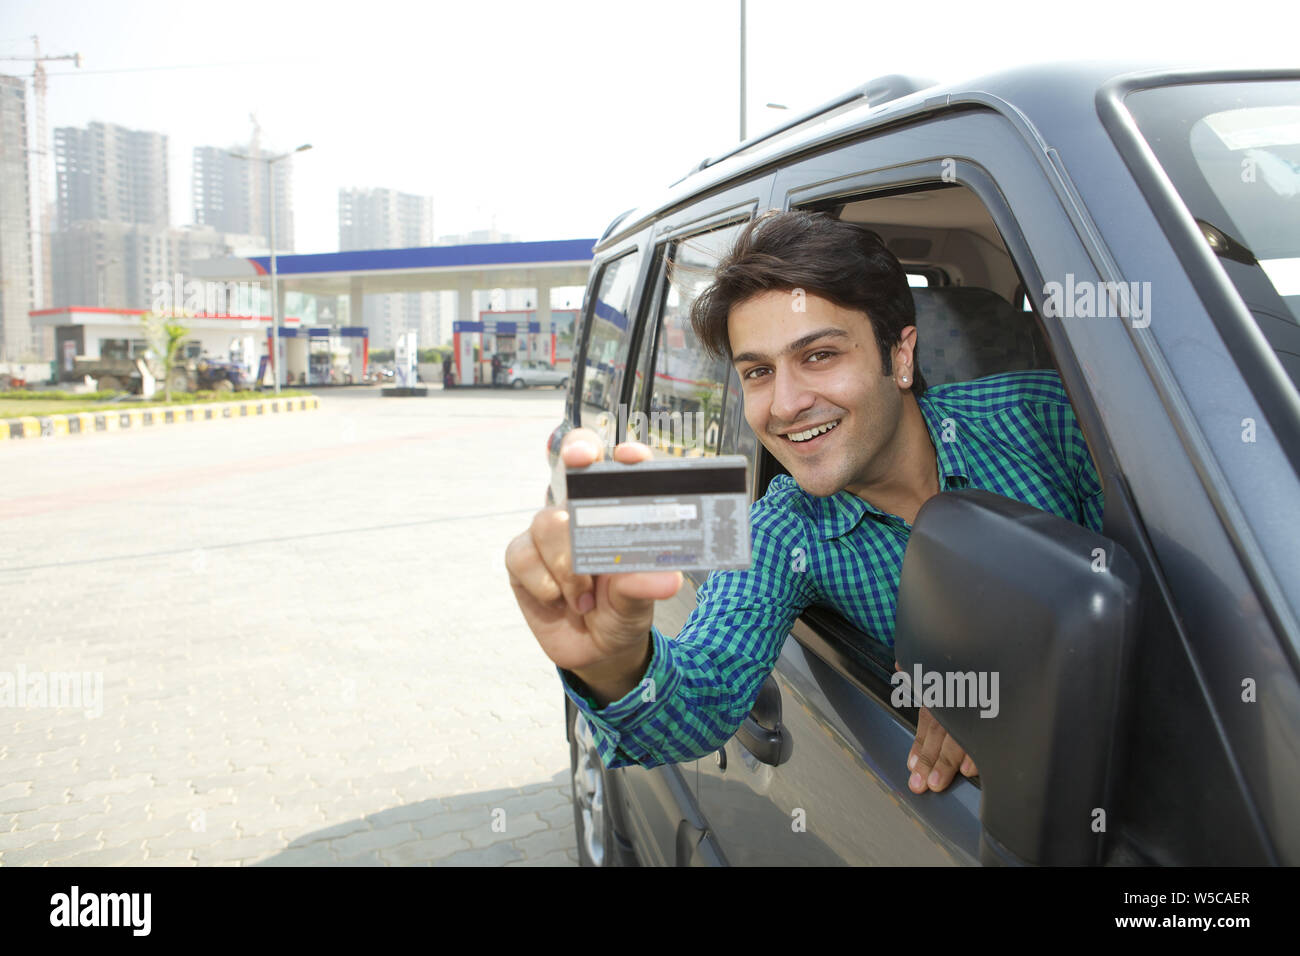 Man showing a credit card in a car Stock Photo